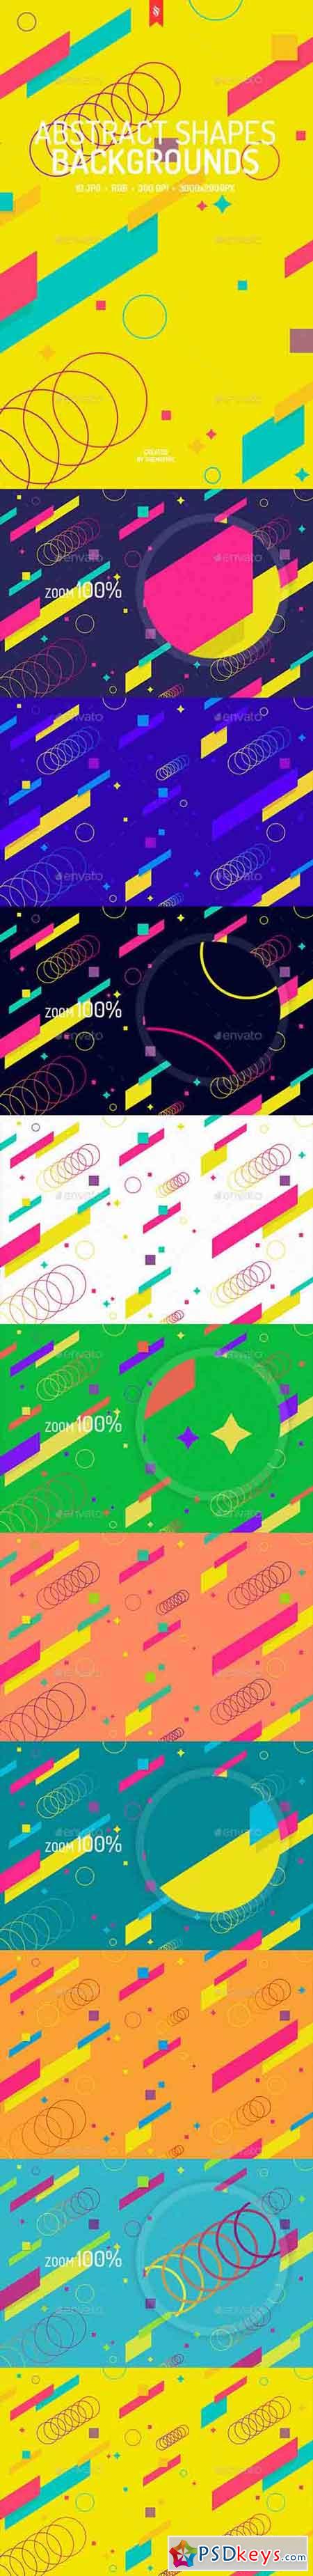 Abstract Shapes Backgrounds 19388379